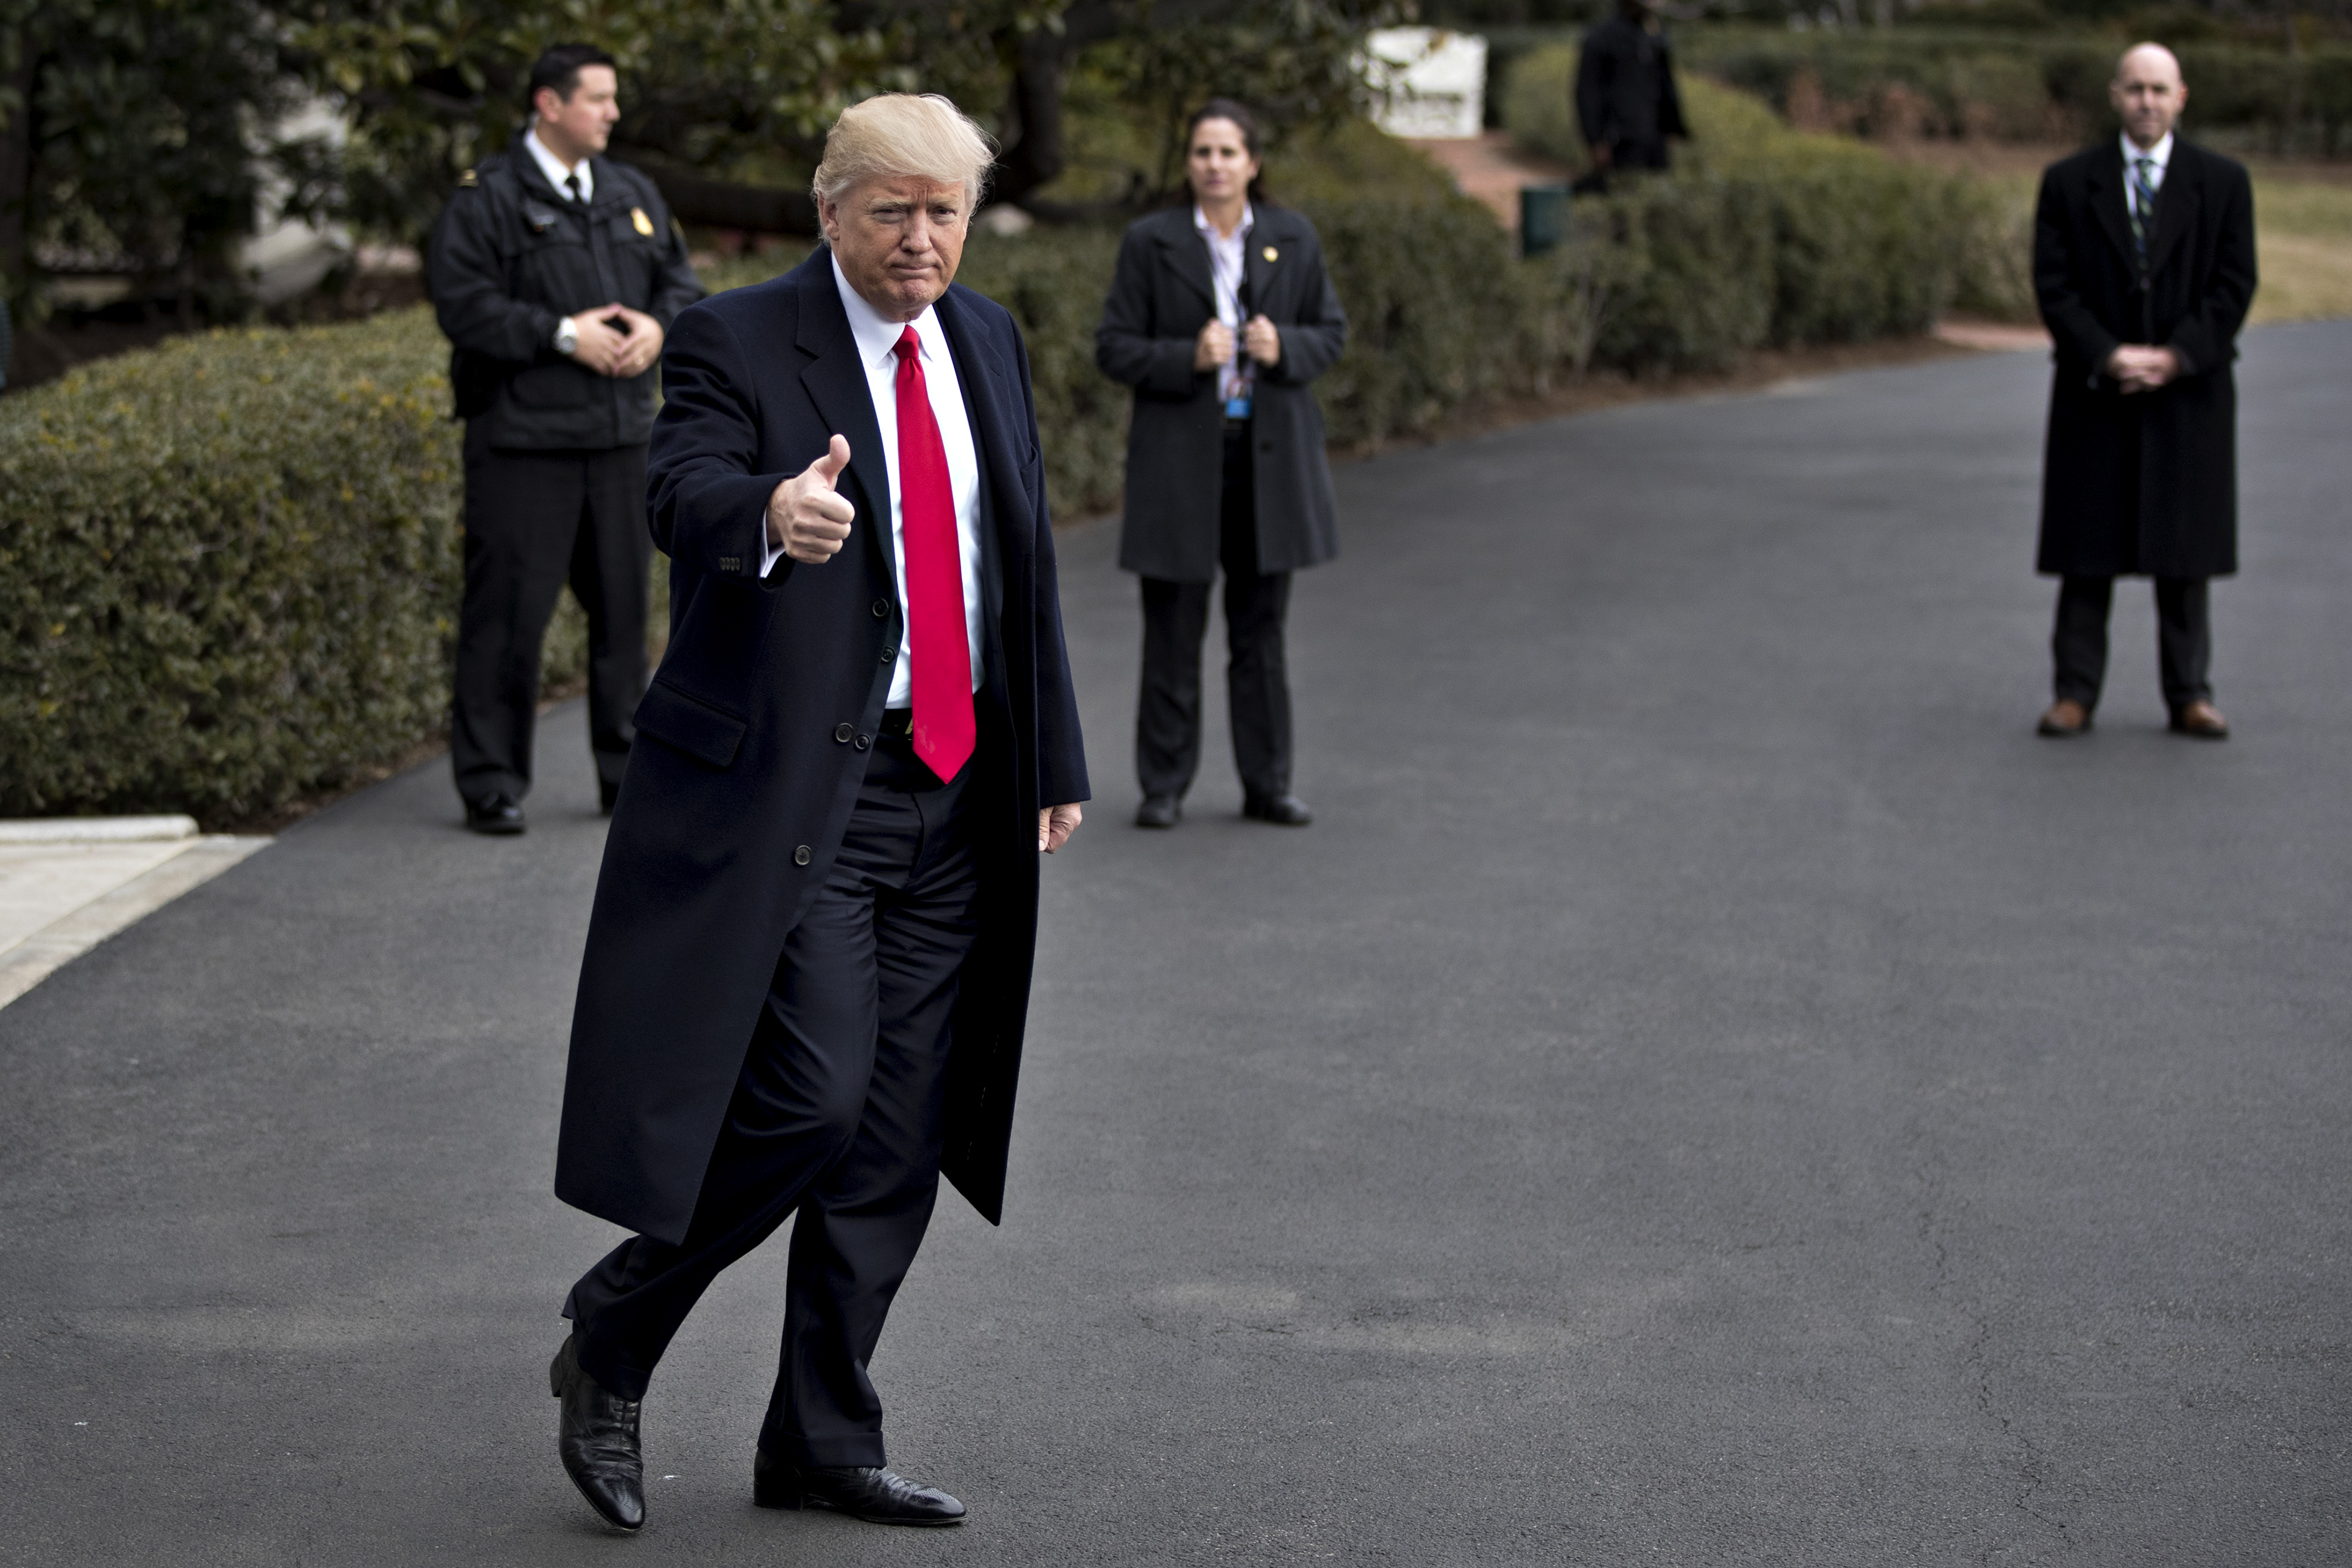 President Donald Trump gestures toward members of the media as he walks out of the White House to board Marine One in Washington, D.C., on Feb. 3, 2017. (Andrew Harrer—Bloomberg/Getty Images)